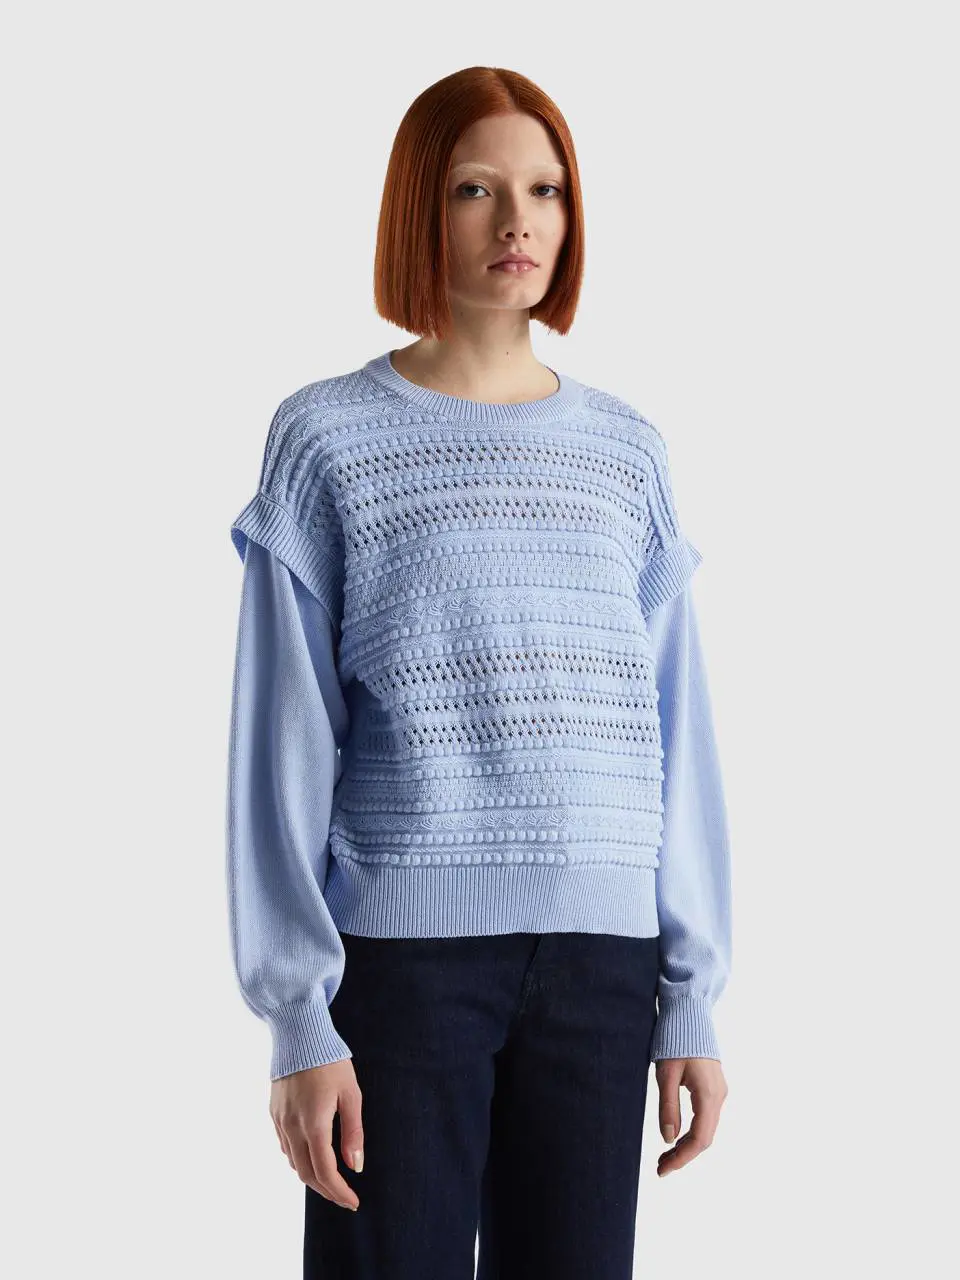 Benetton knit sweater with flaps. 1